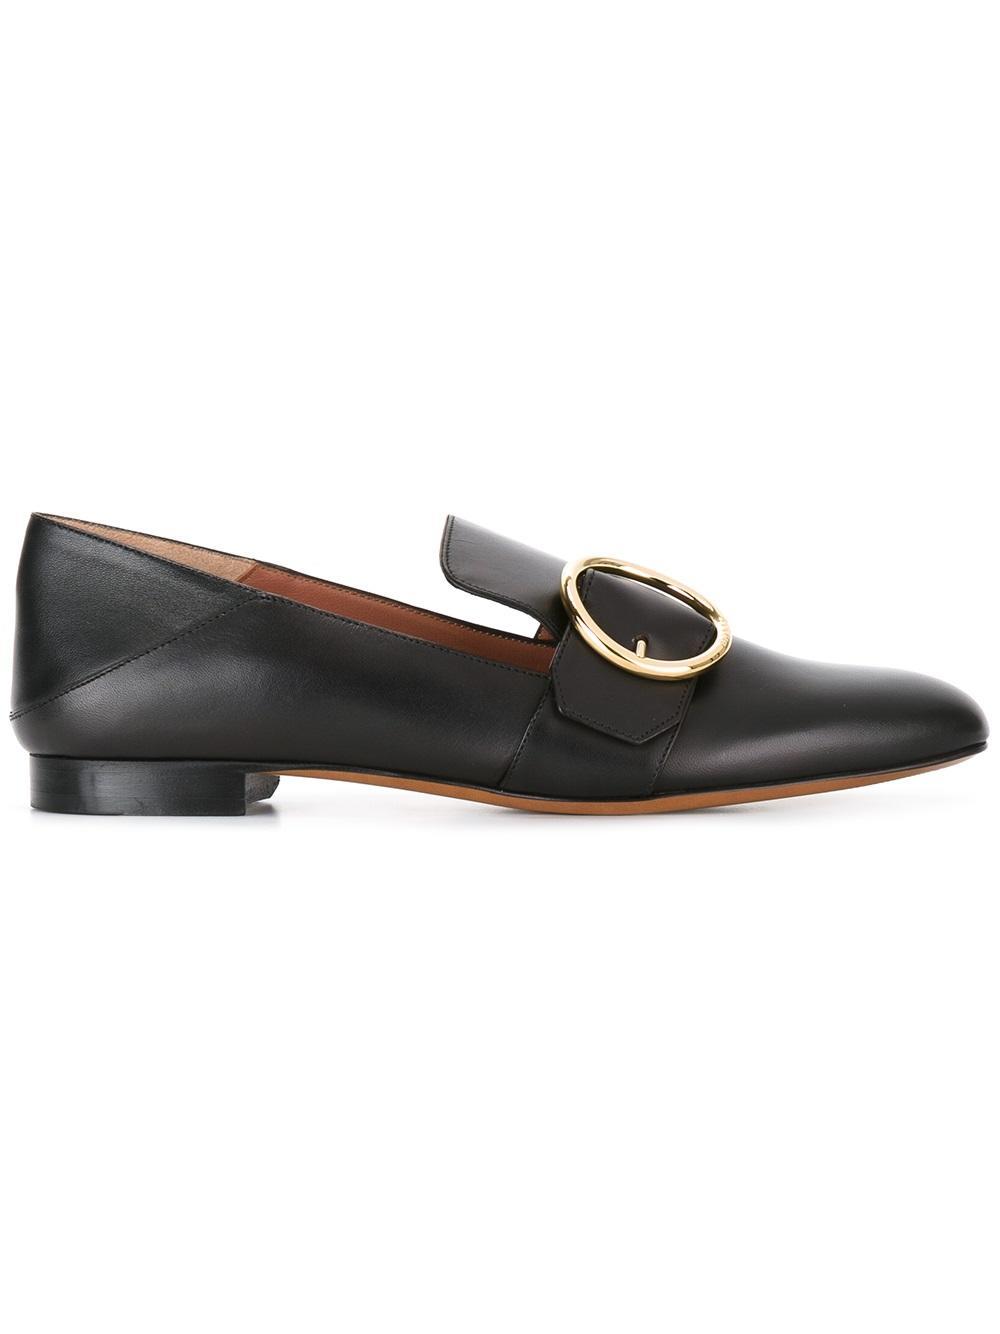 Lyst - Bally Women's Black Leather Loafers in Black